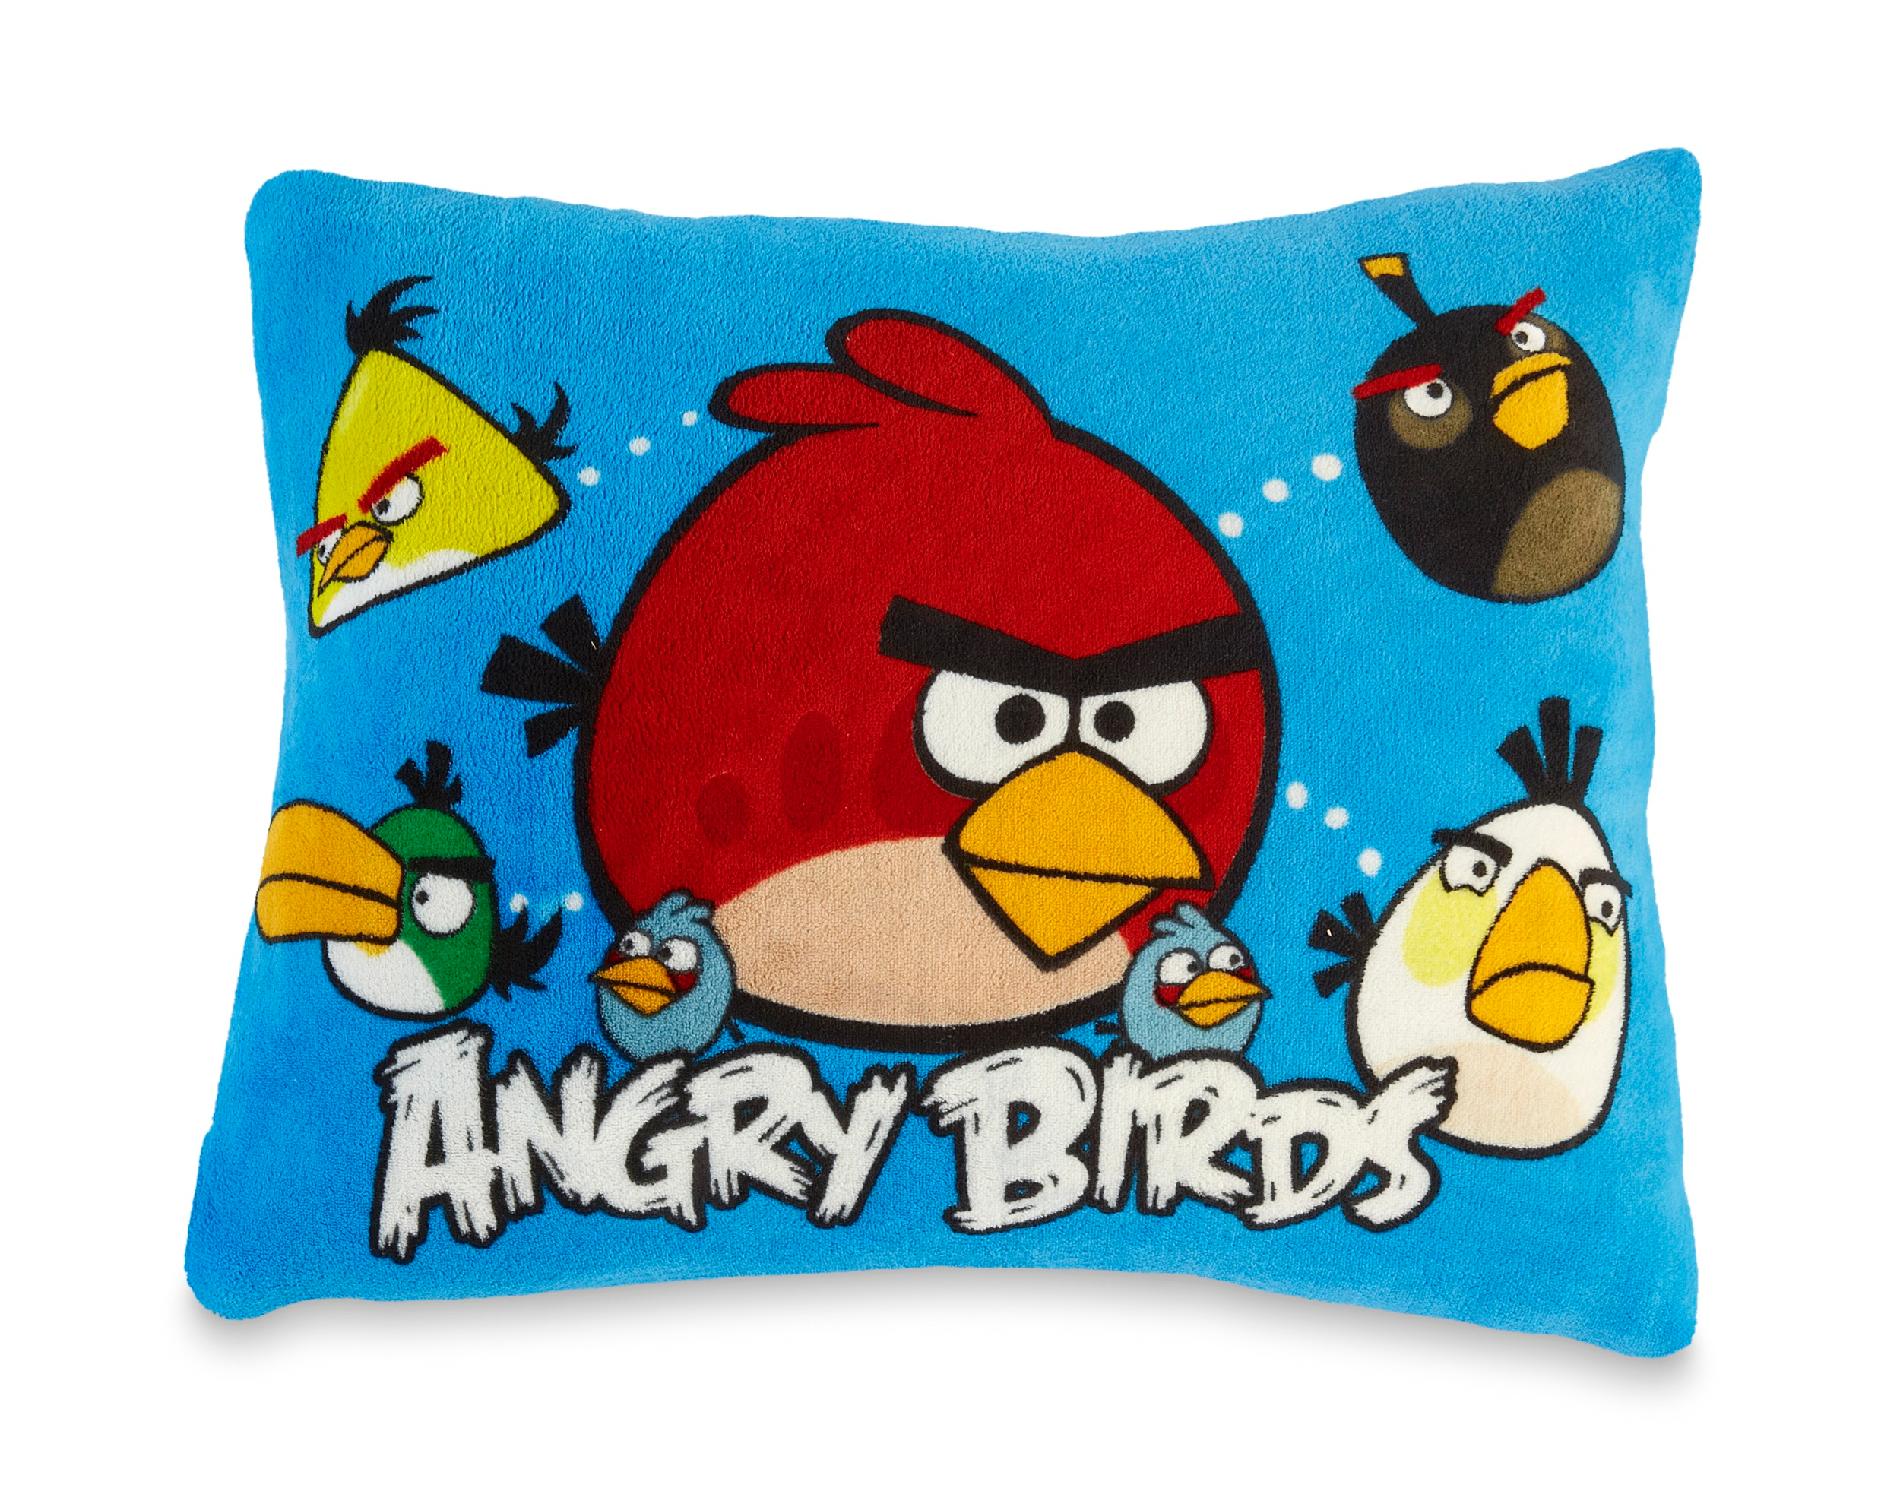 Multi-Colored Angry Birds Decorative Pillow